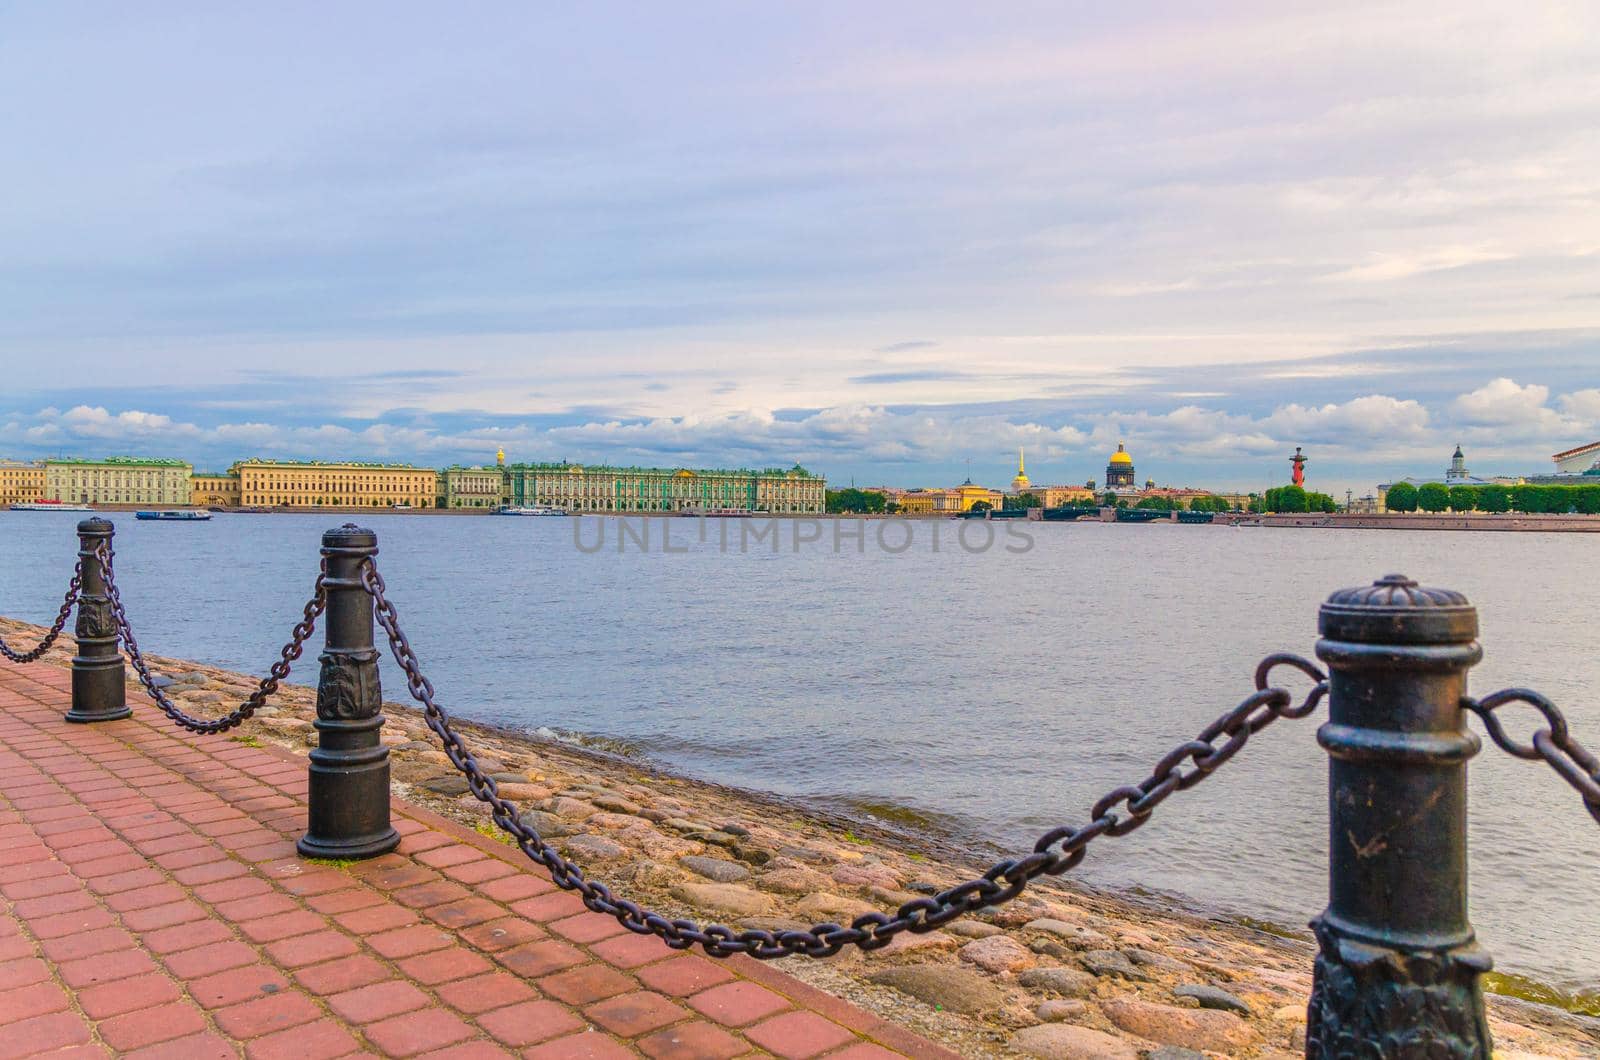 Promenade of Zayachy Hare Island with Fencing chain posts, Neva river, Cityscape of Saint Petersburg Leningrad city with Winter Palace, State Hermitage Museum, Saint Isaac's Cathedral, Russia